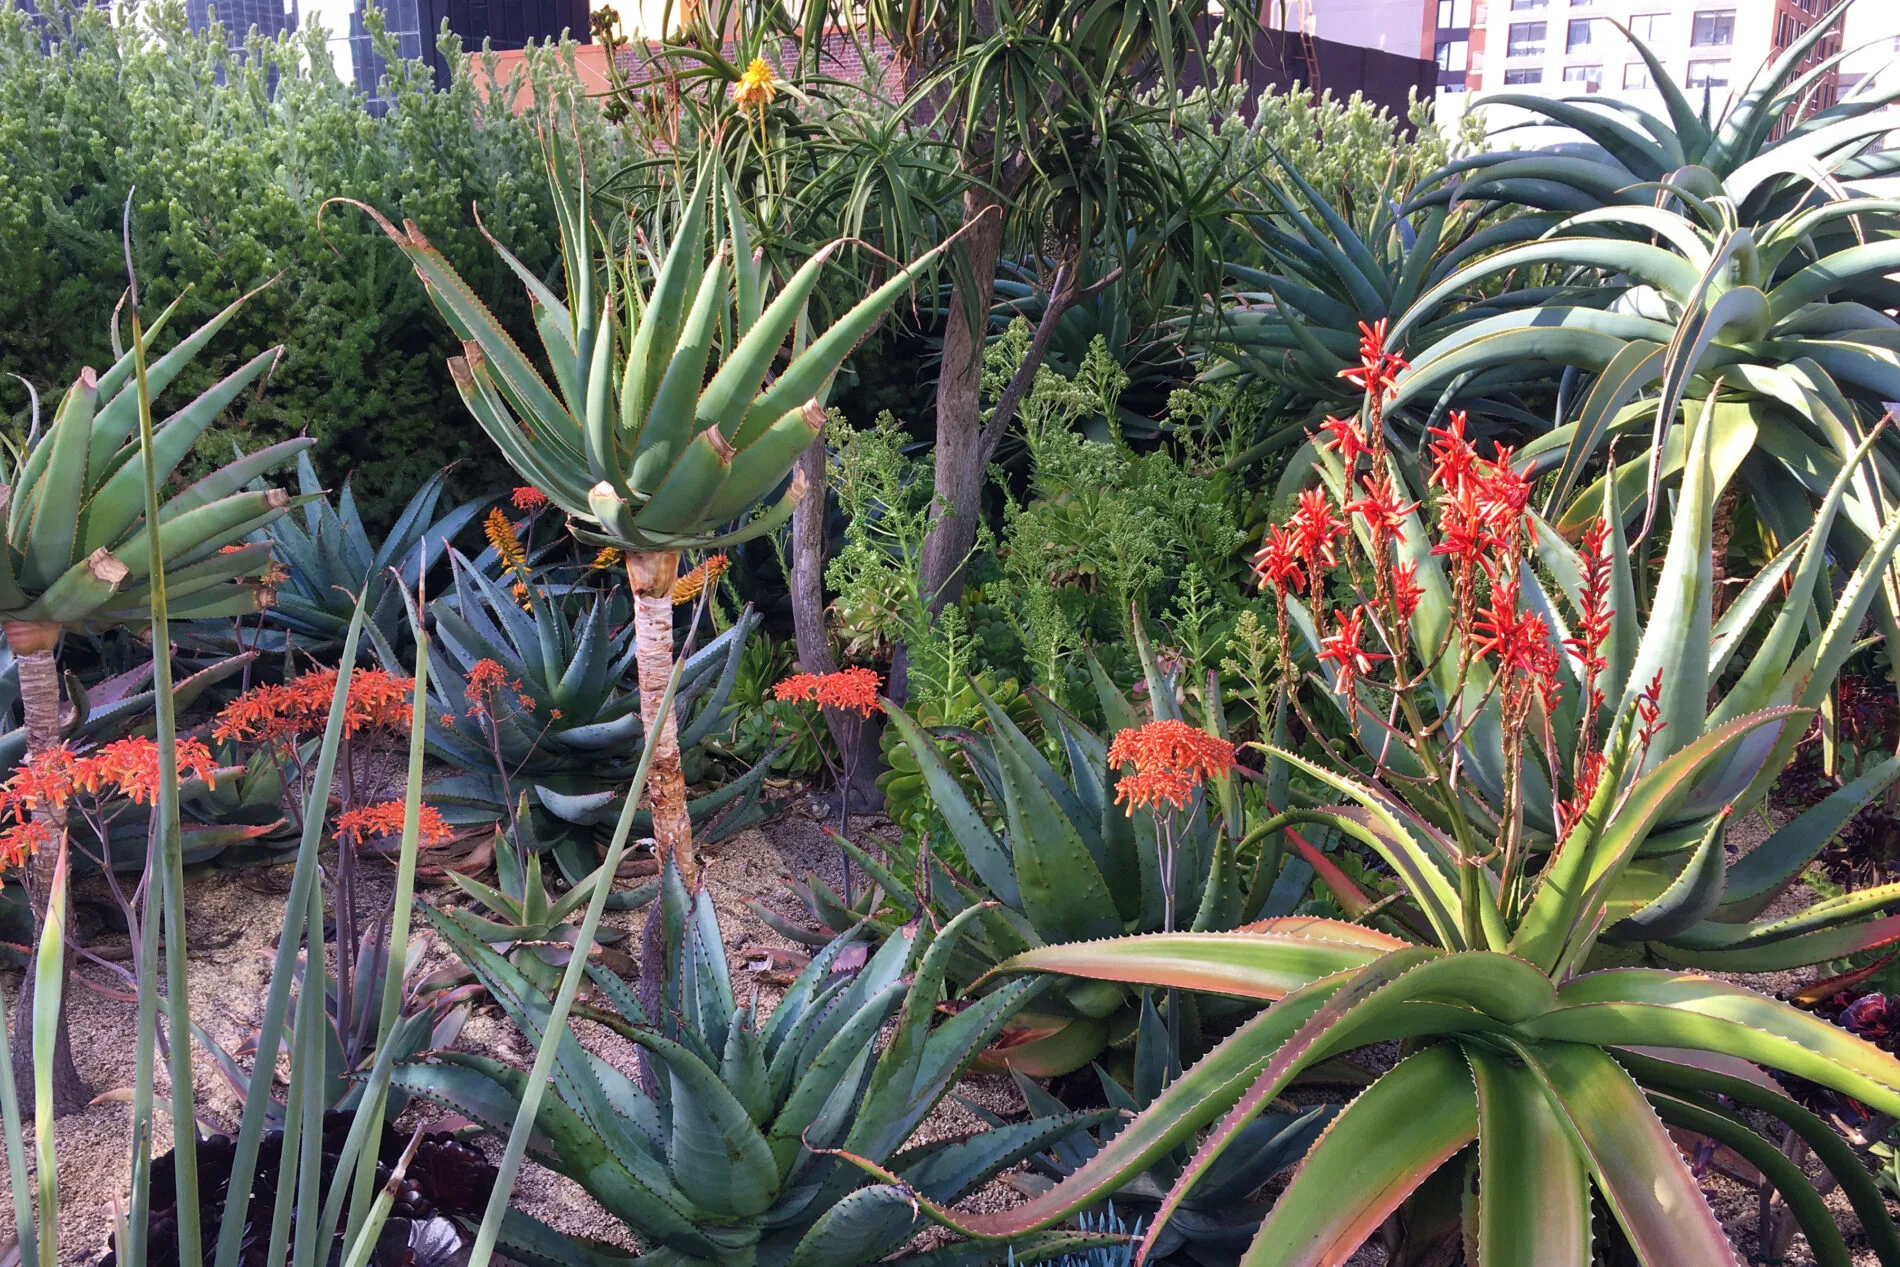 Desert Garden in Salesforce Park on the Transit Center roof in San Francisco. It’s one of 11 gardens in the park.